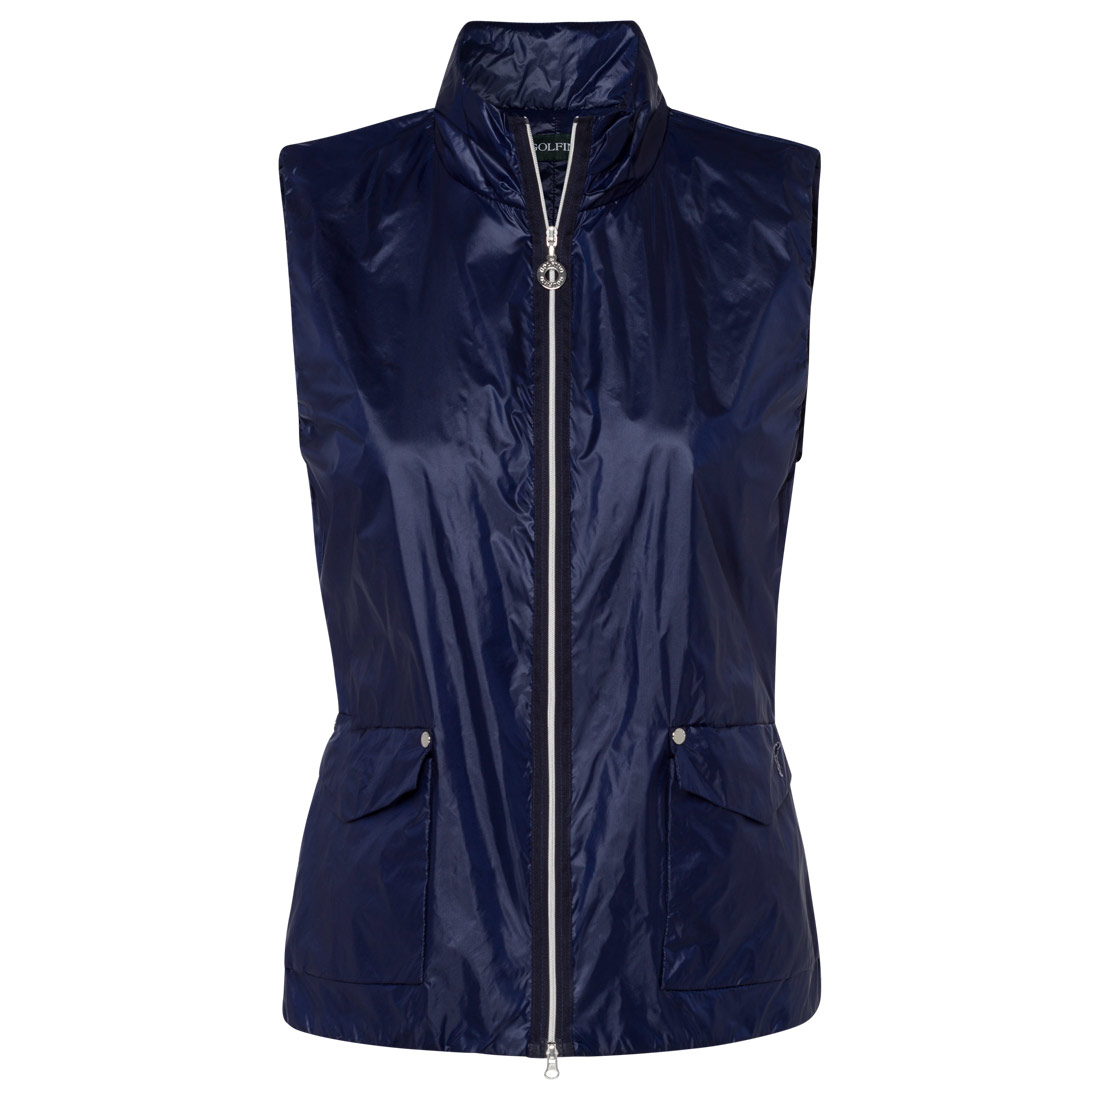 Ladies' gilet with wind protection function and slight gloss